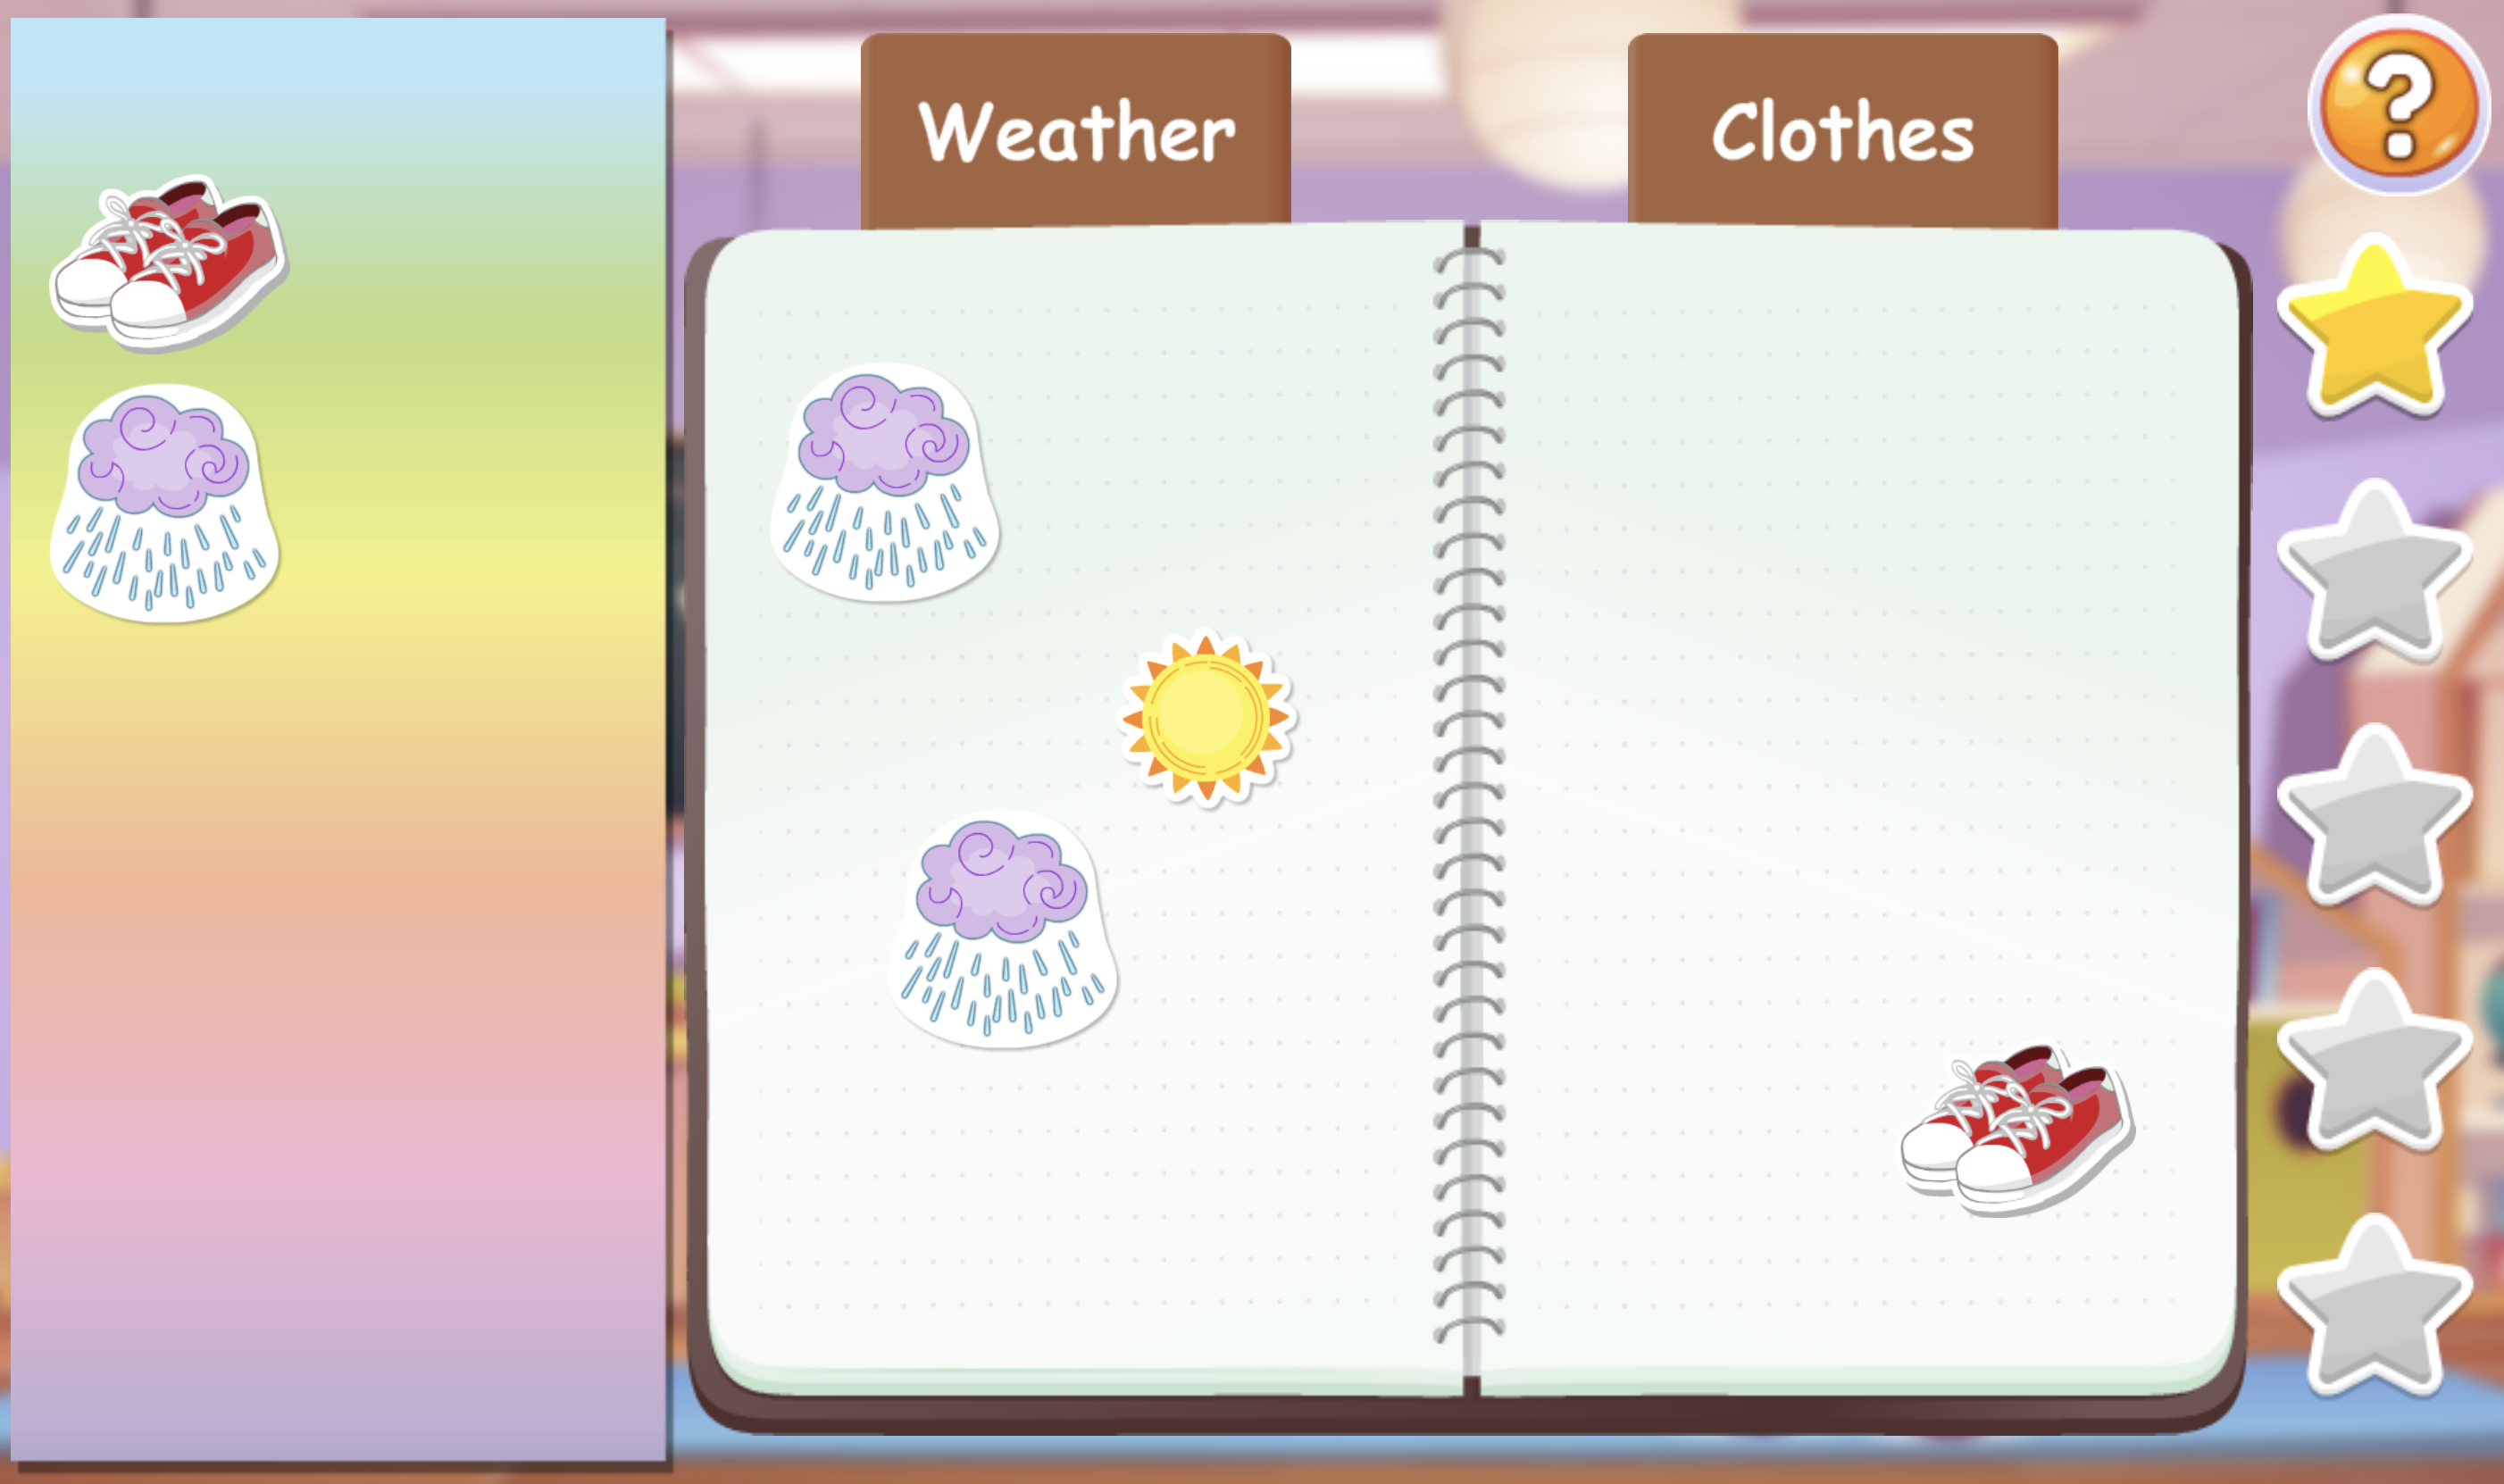 Sort the stickers by weather and clothes